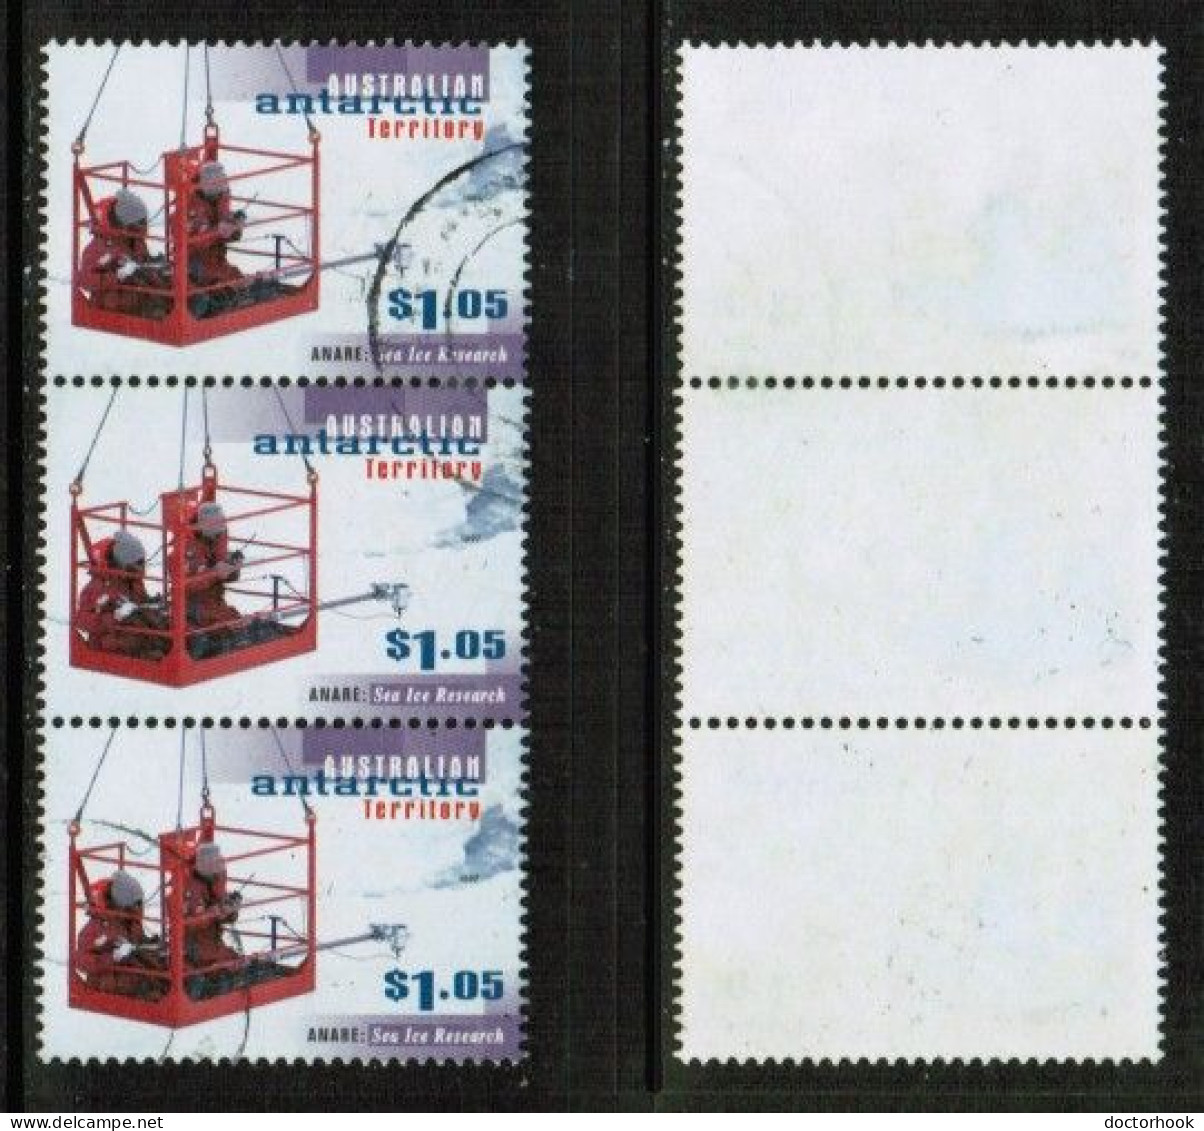 AUSTRALIAN ANTARCTIC TERRITORY   Scott # L 105 USED STRIP Of 3 (CONDITION AS PER SCAN) (Stamp Scan # 930-2) - Oblitérés